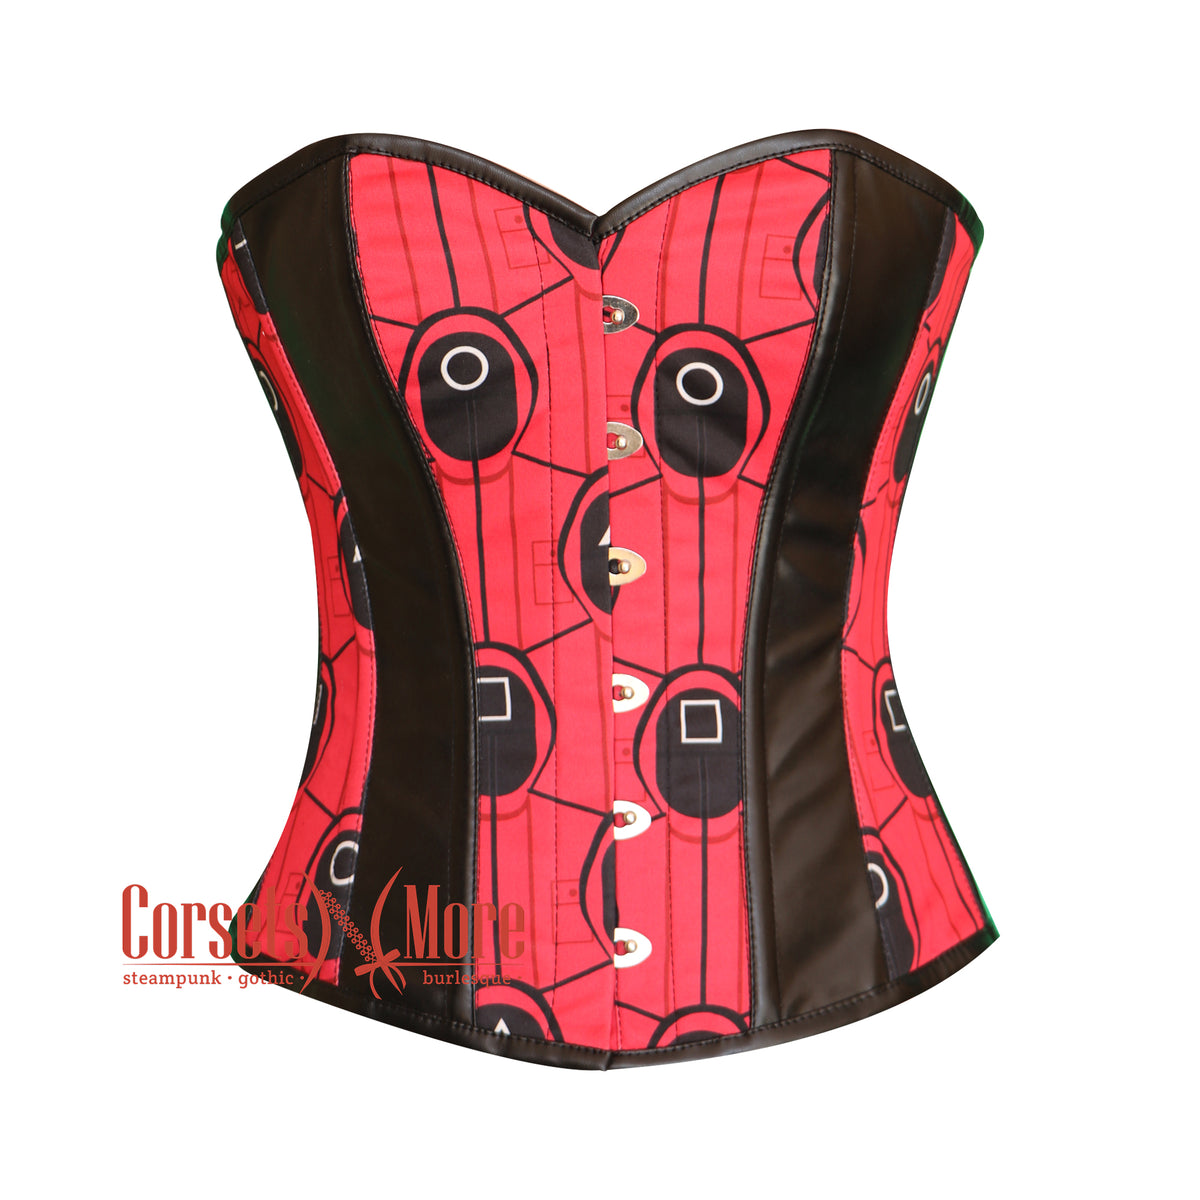 Red And Black Printed Lycra Gothic Costume Overbust Bustier Top

– CorsetsNmore